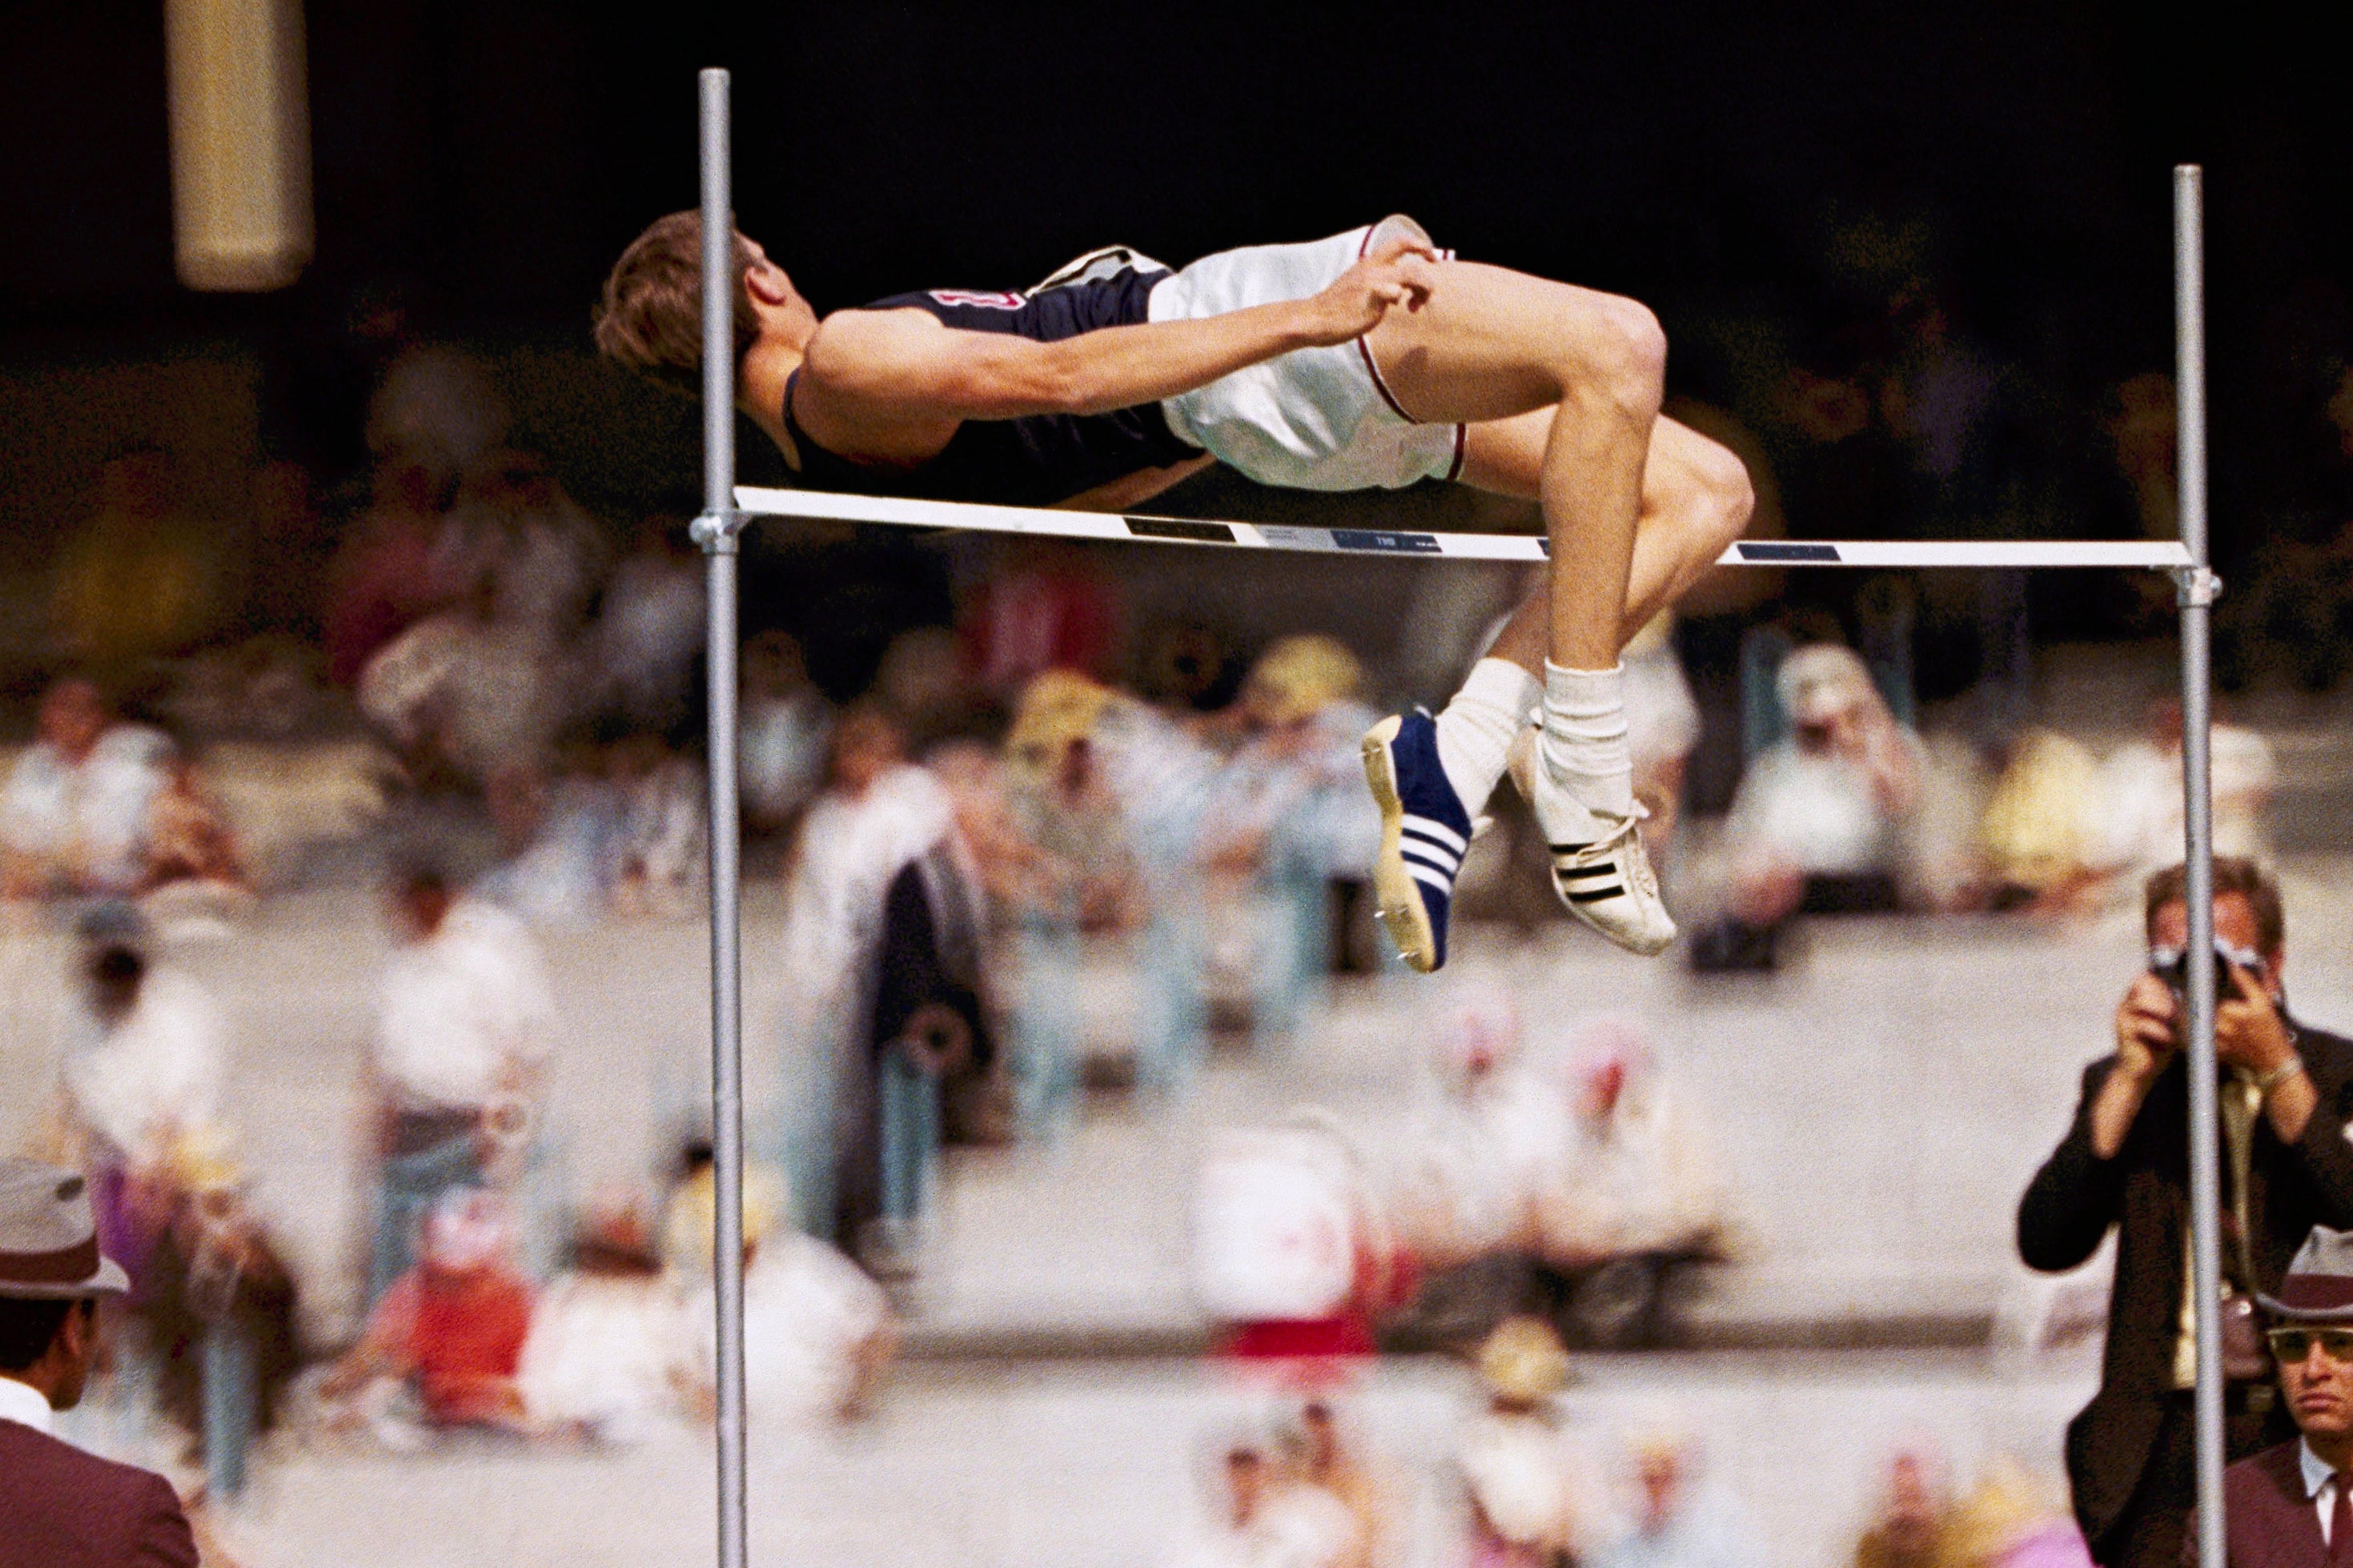 Dick Fosbury clears the bar on his way to winning Olympic gold in Mexico